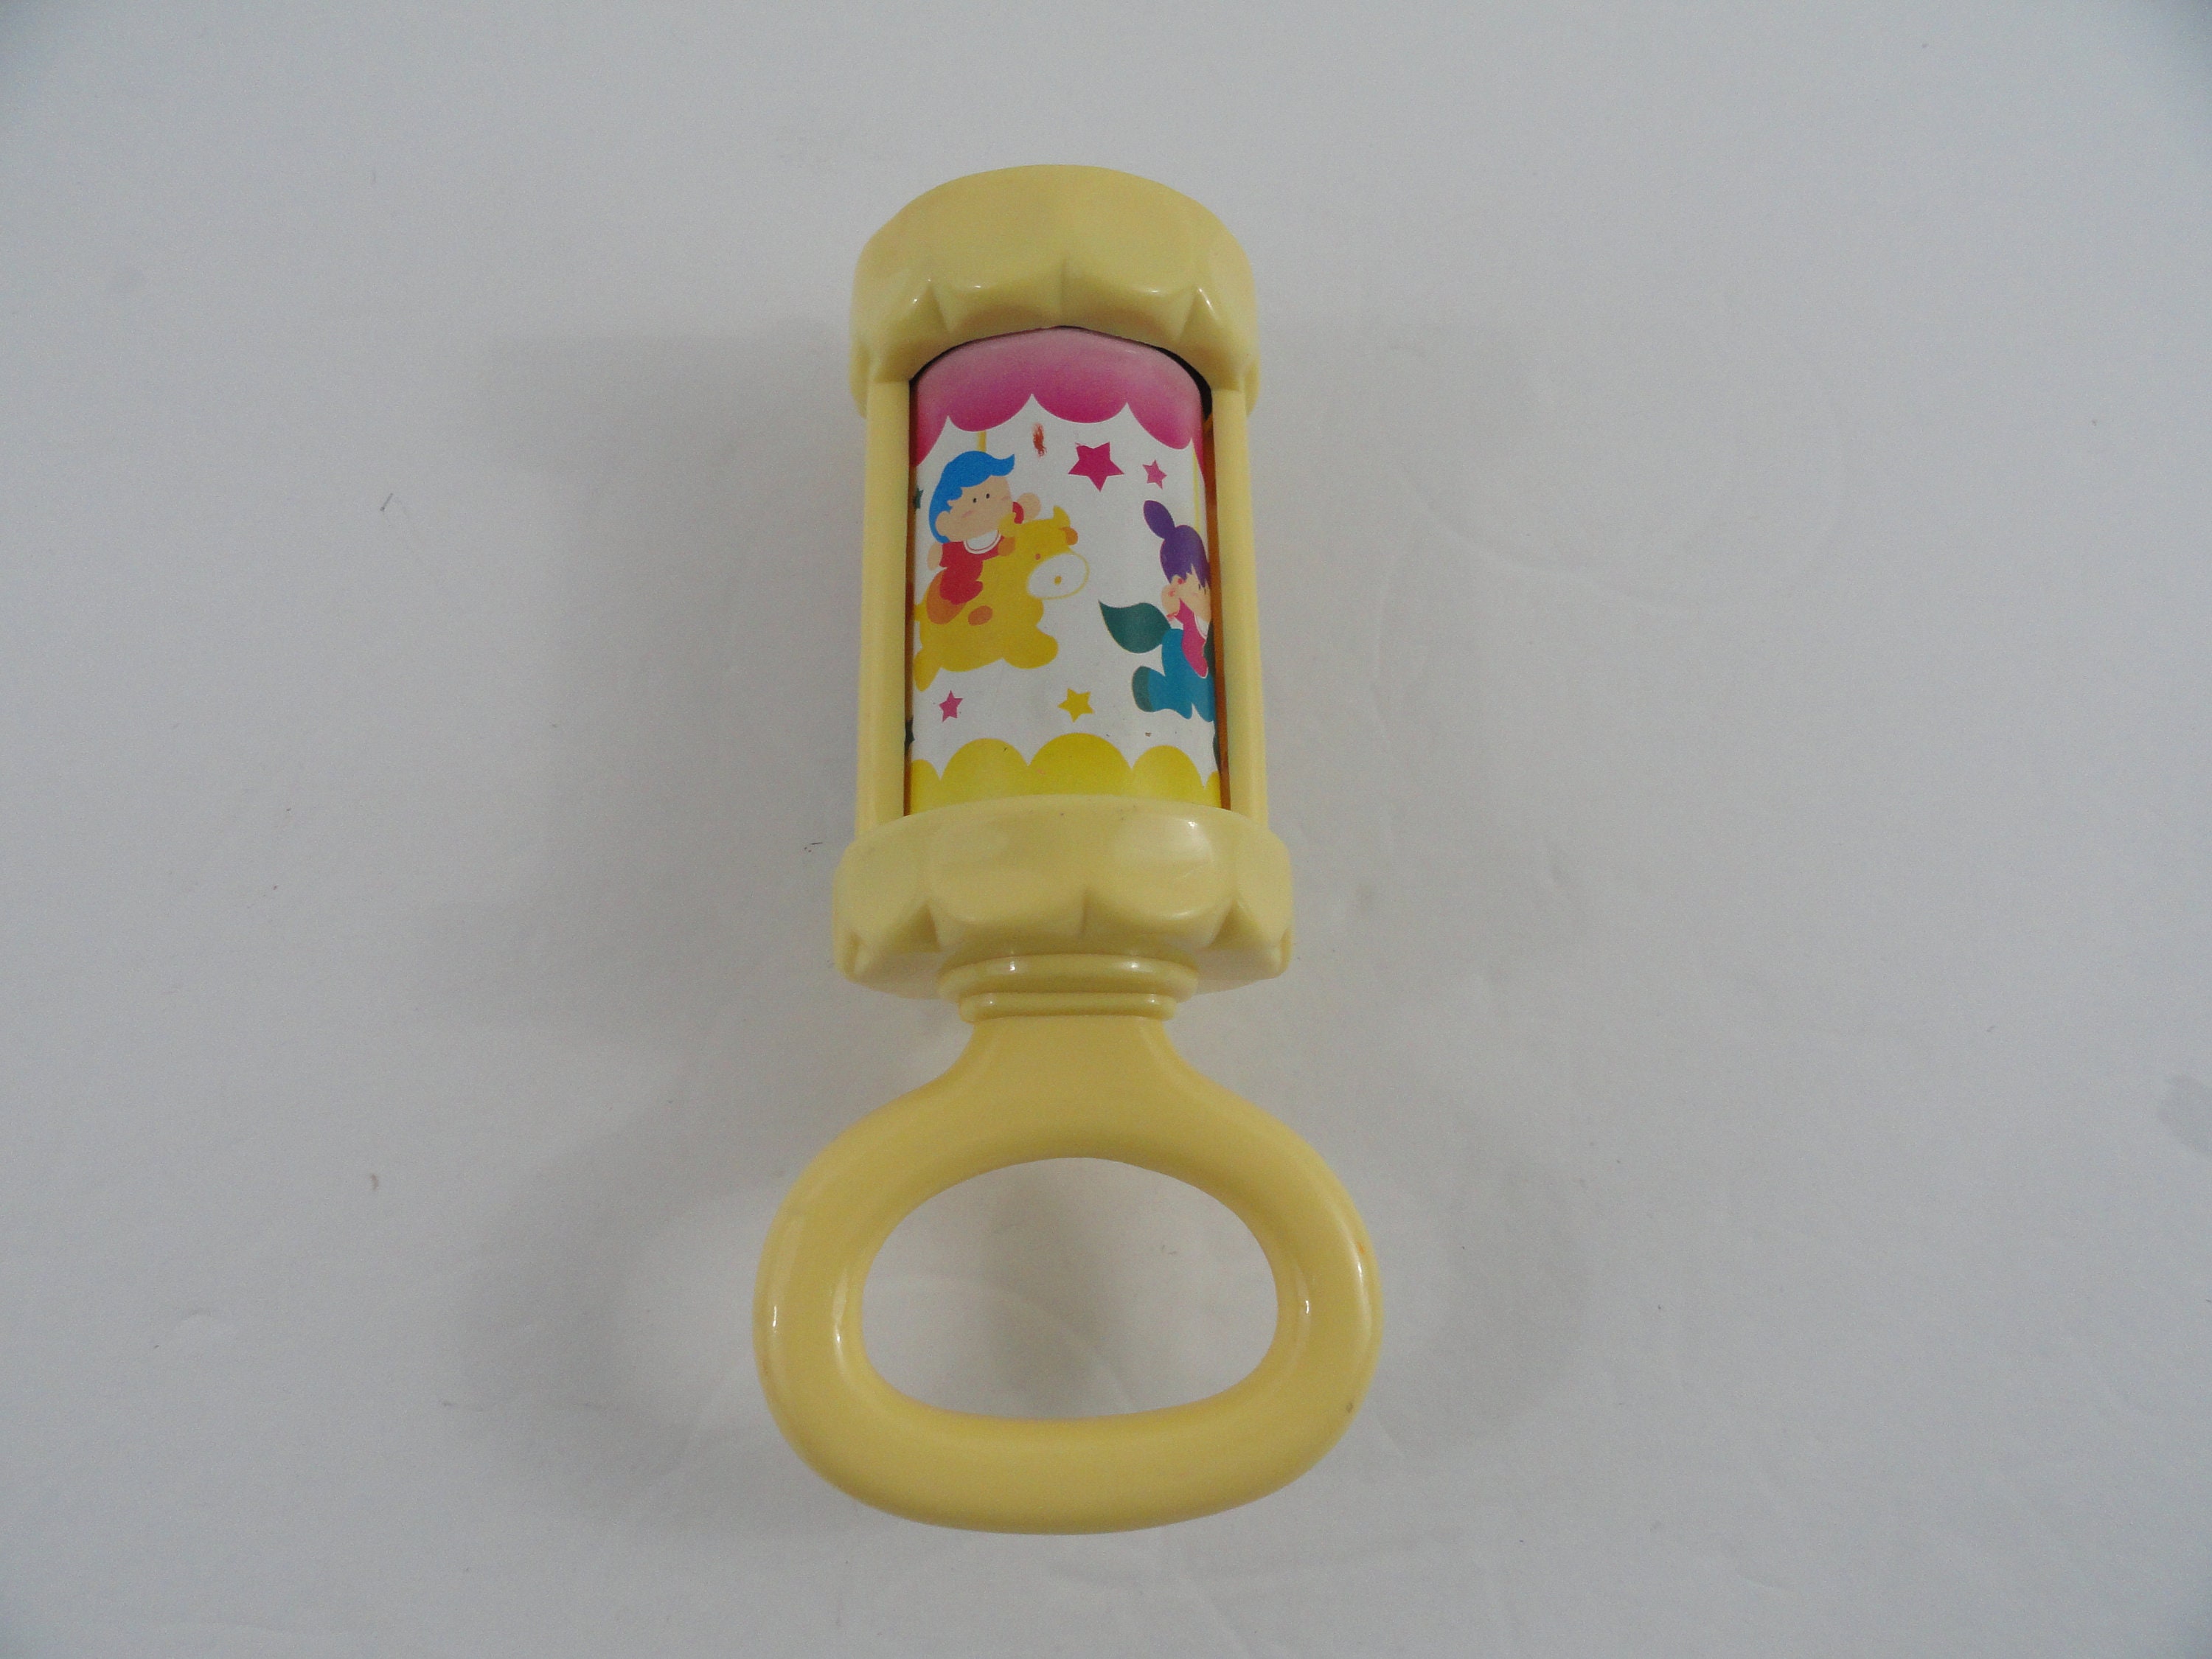 Vintage BABY KING Big Top Chime Rattle Infant Plastic Toy 1994